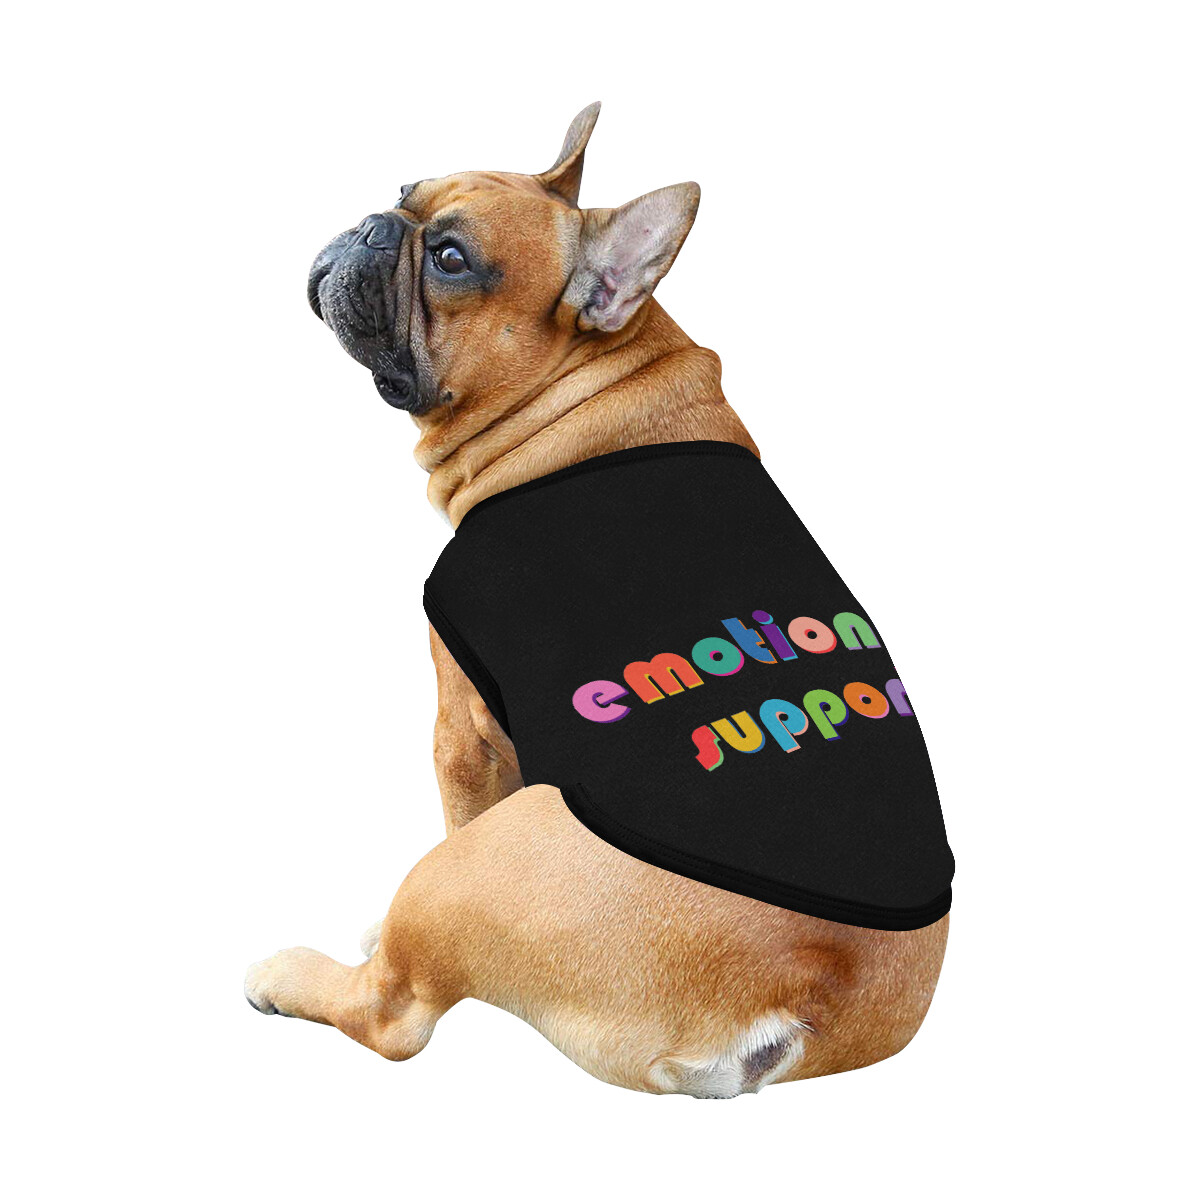 🐕 Emotional support Dog shirt, Dog Tank Top, Dog t-shirt, Dog clothes, Gifts, front back print, 7 sizes XS to 3XL, dog gifts, black